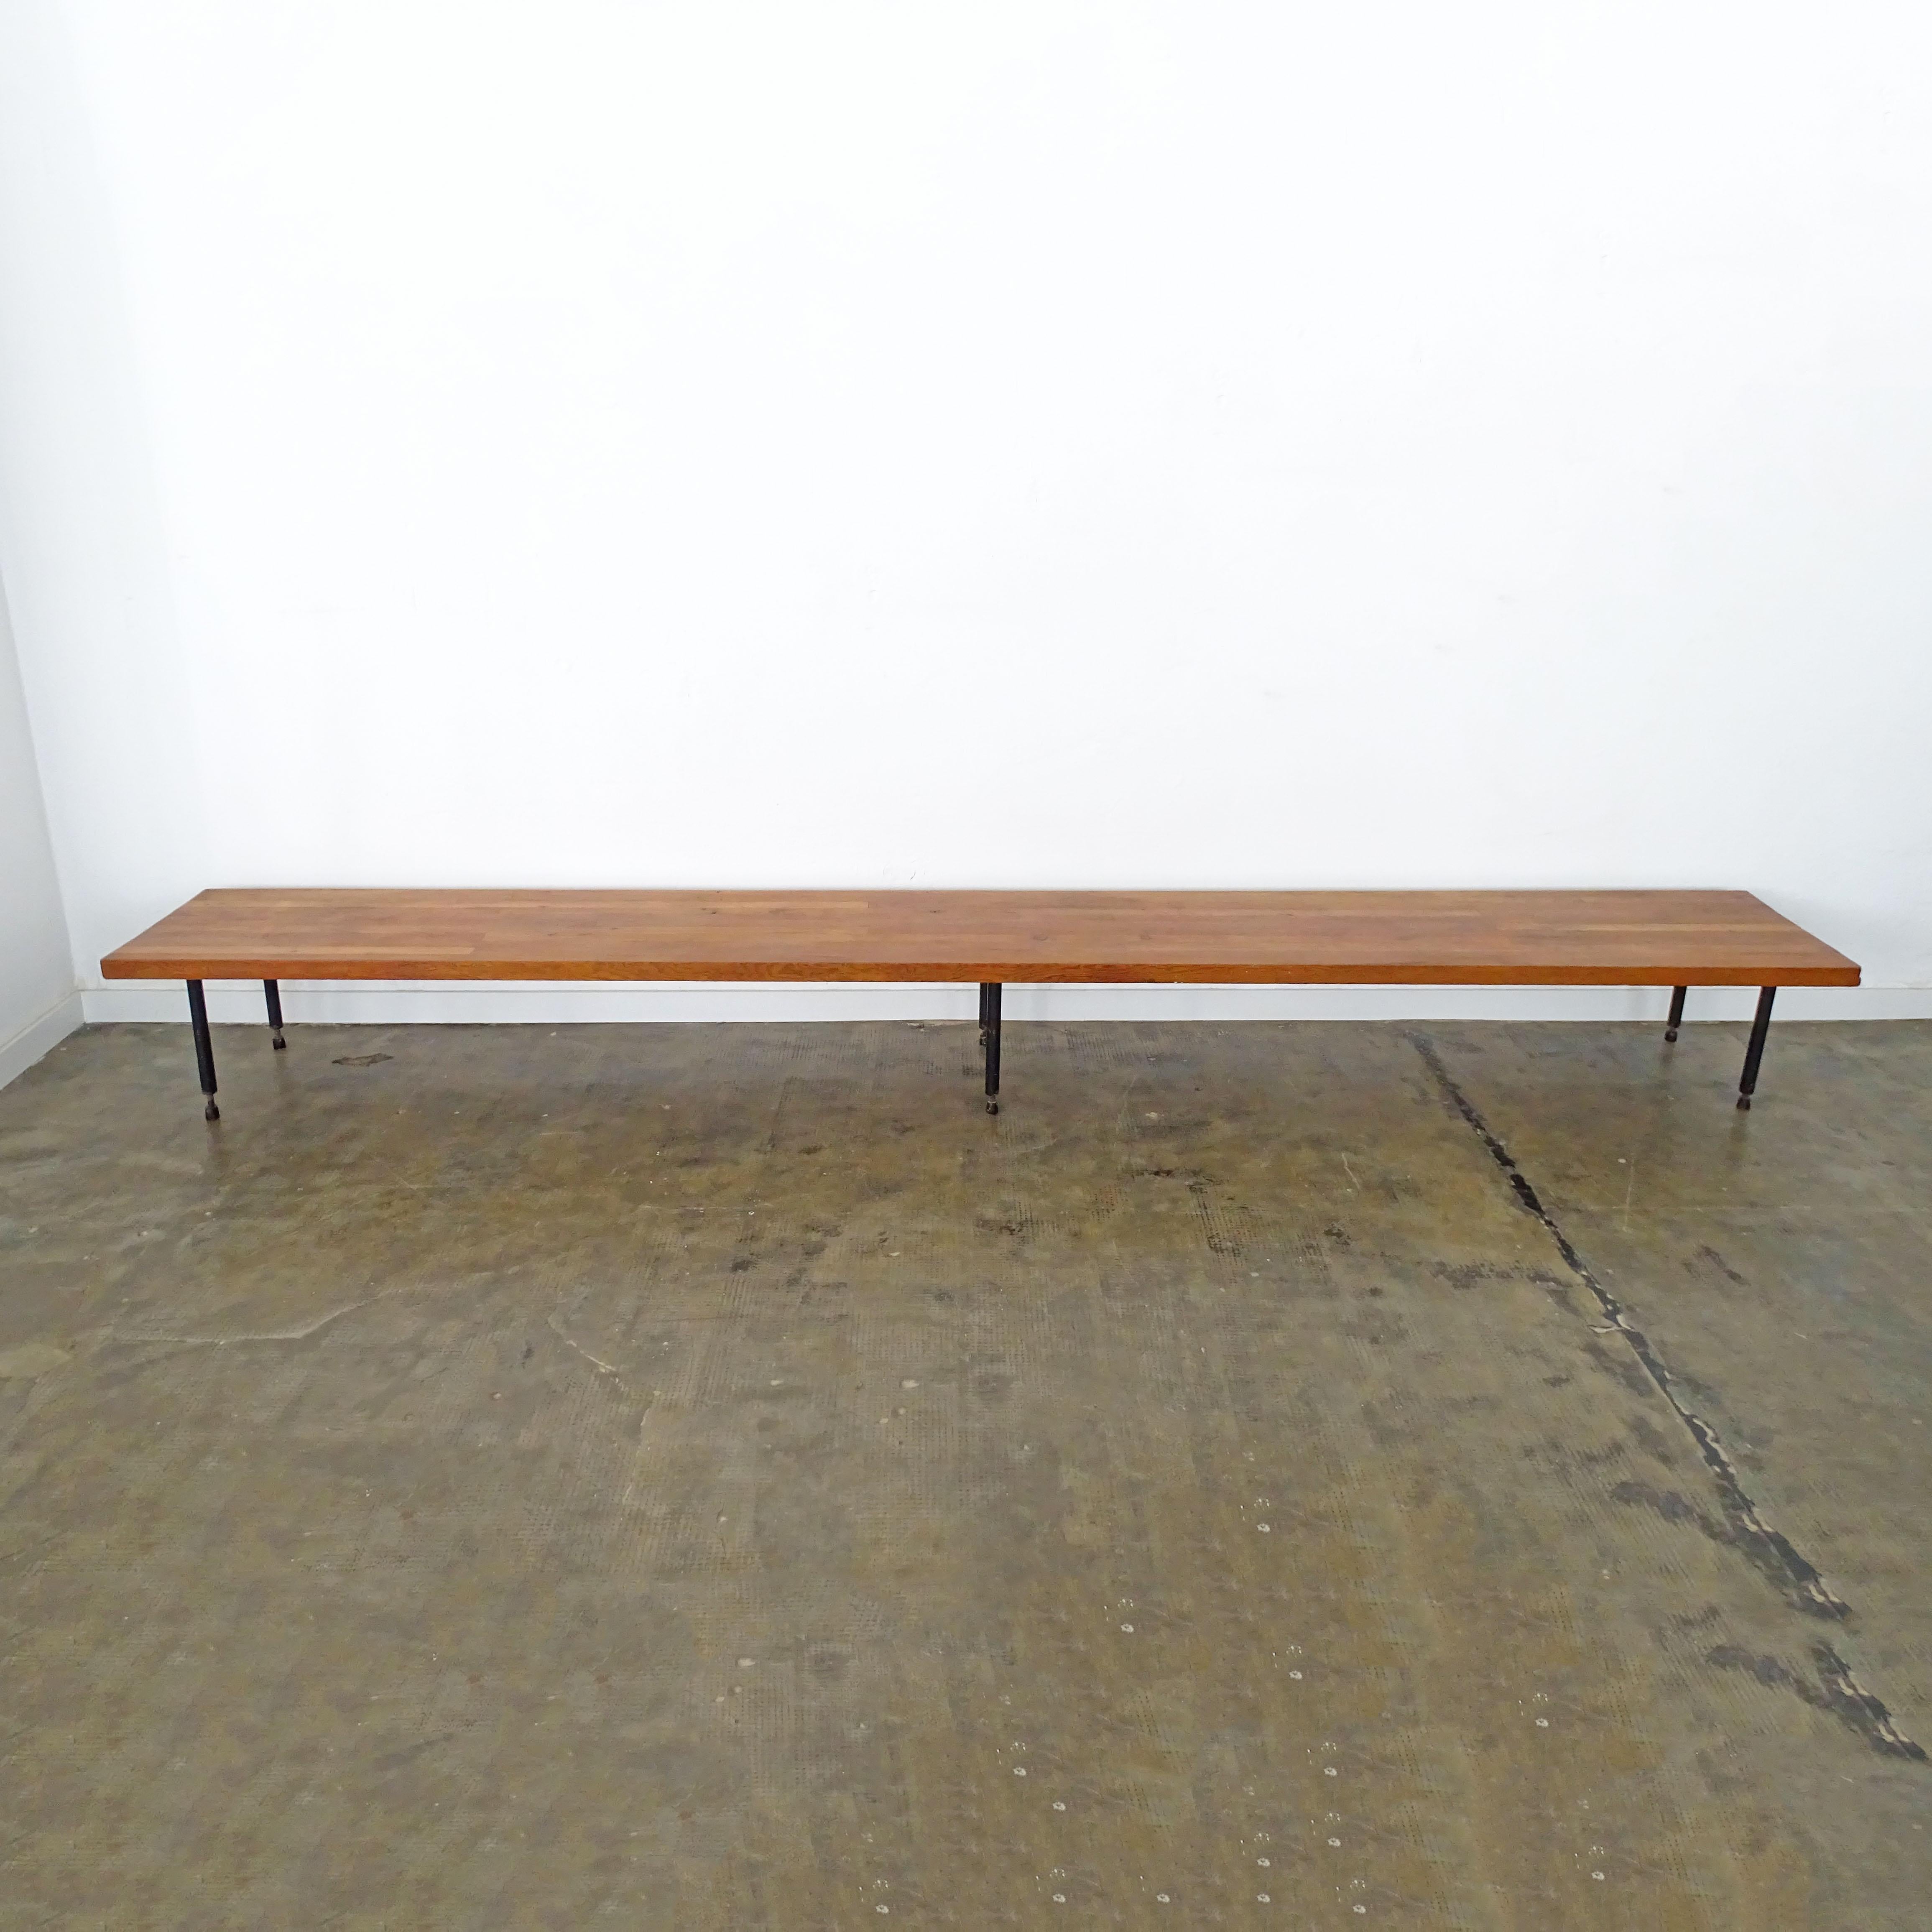 Extra long Italian 1950s wooden bench on black lacquered metal legs.